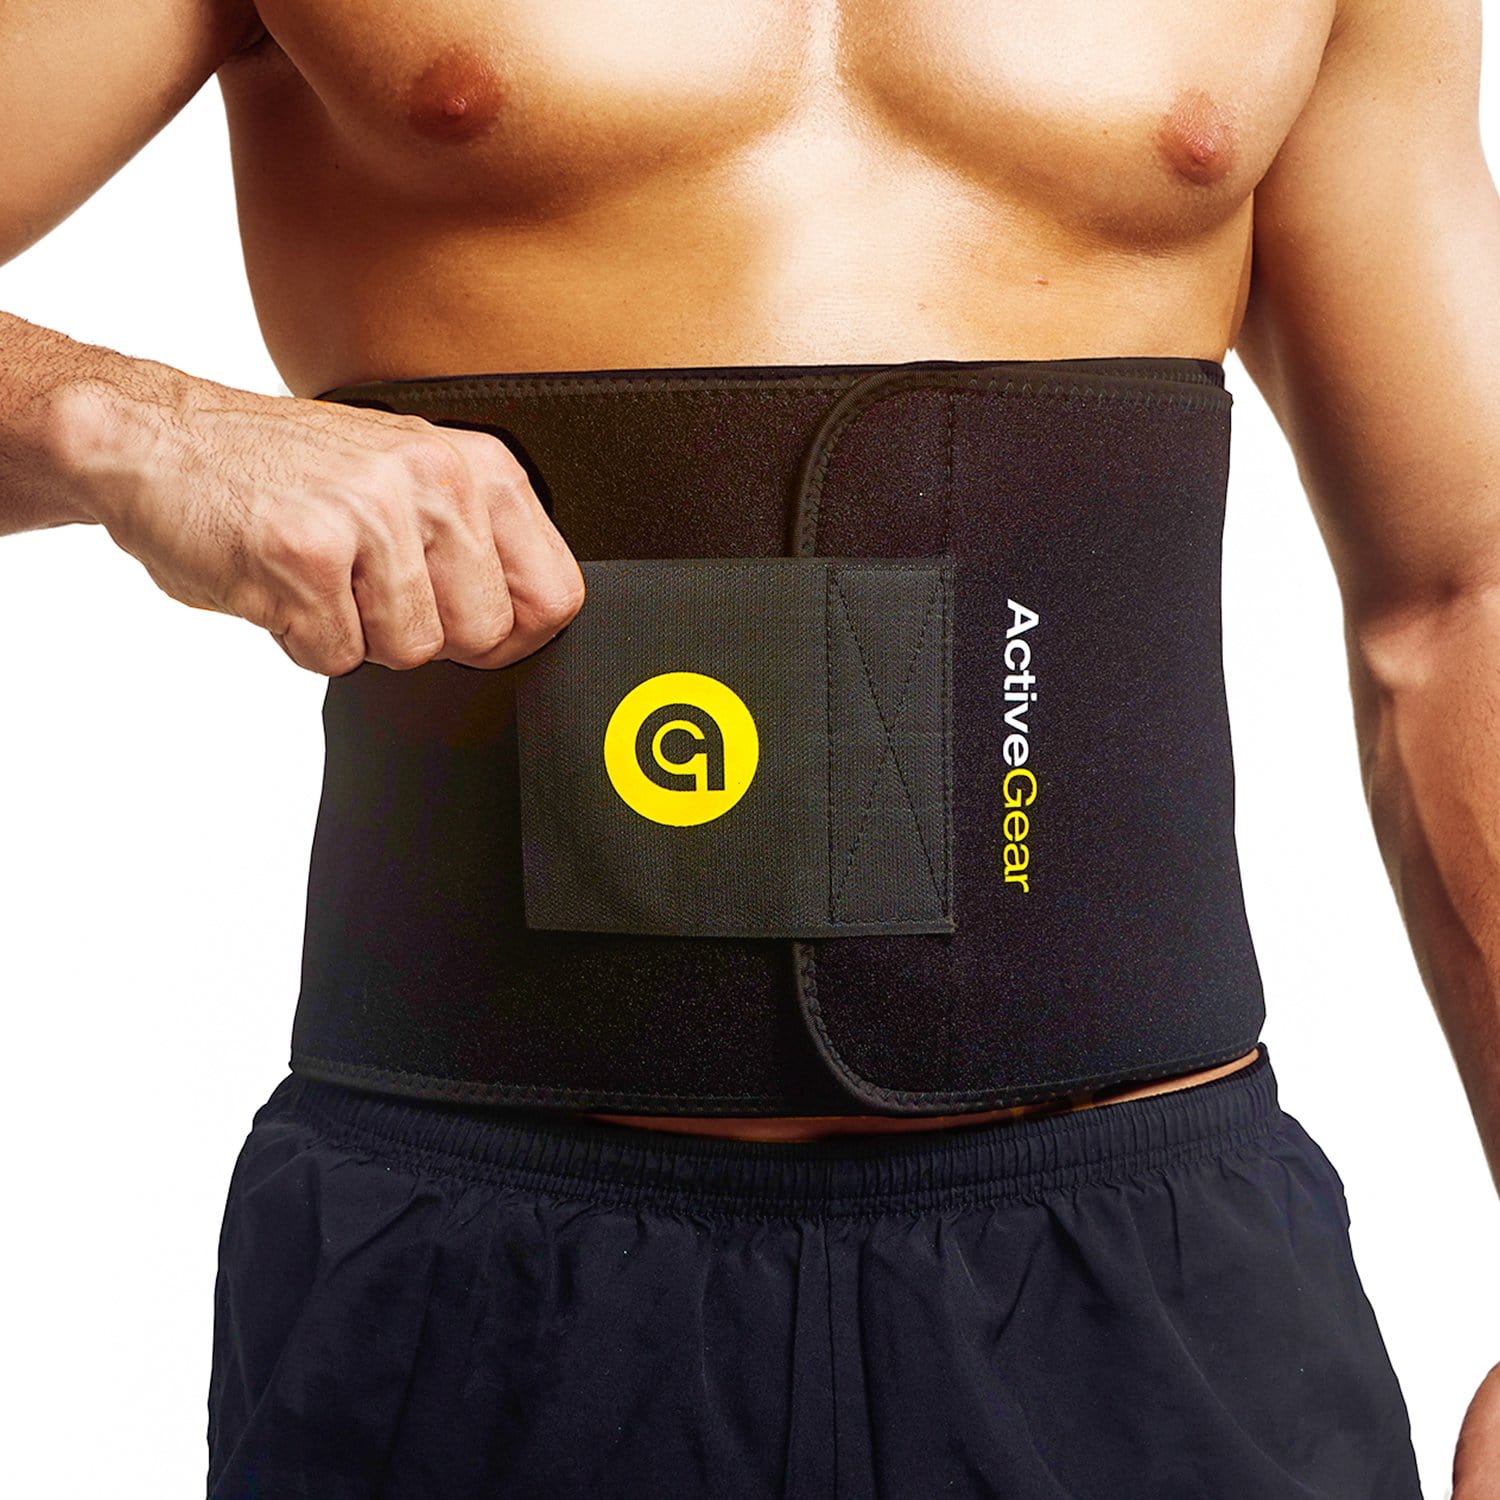 How Does the Trimmer Belt Help You to Lose Belly Weight?